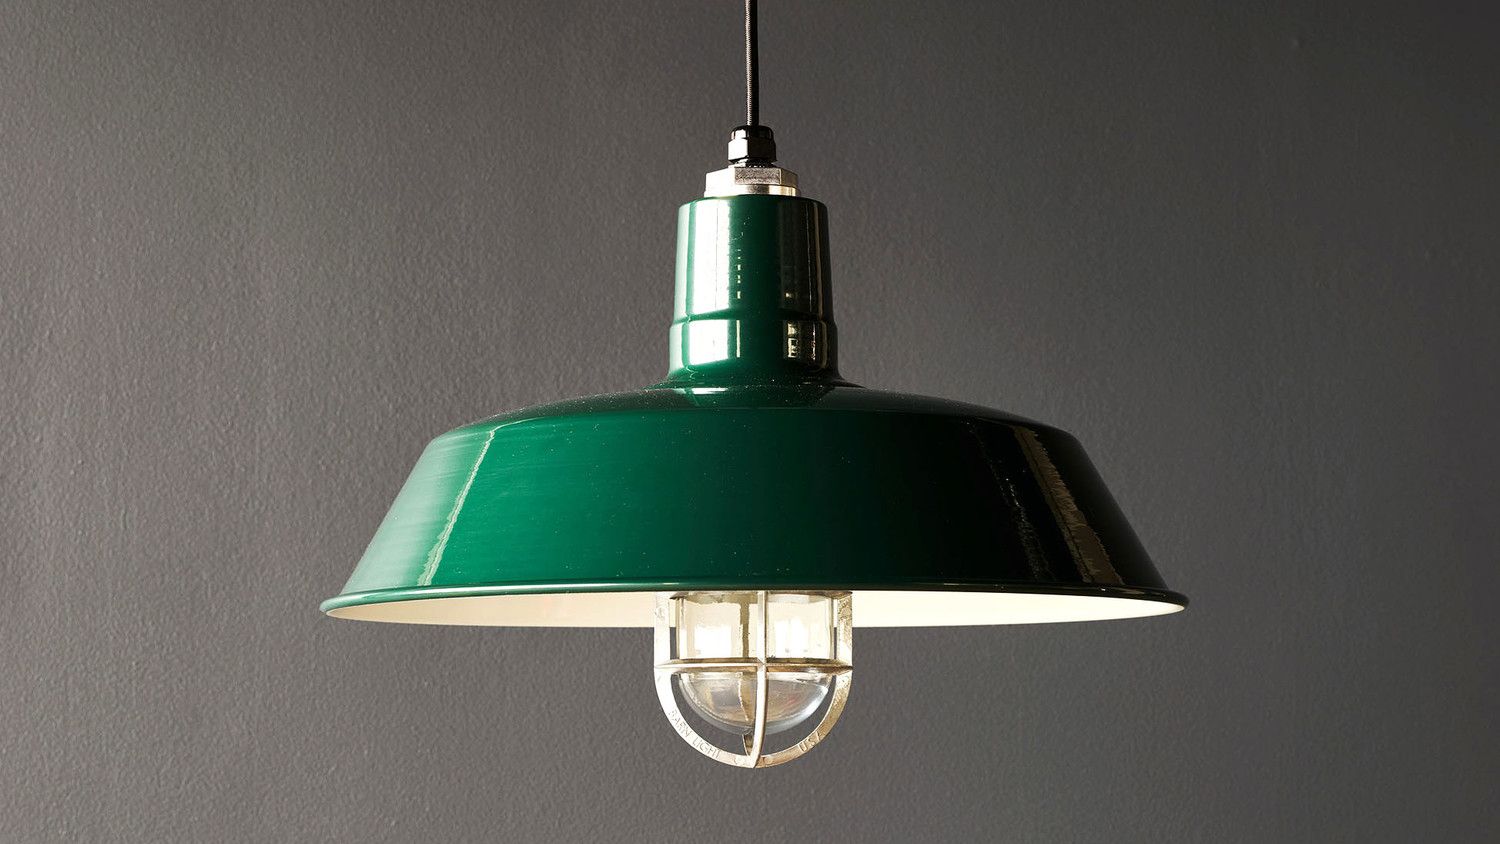 New Deals On Rossi 1 Light Pendant, Chrome With Regard To Rossi Industrial Vintage 1 Light Geometric Pendants (View 8 of 30)